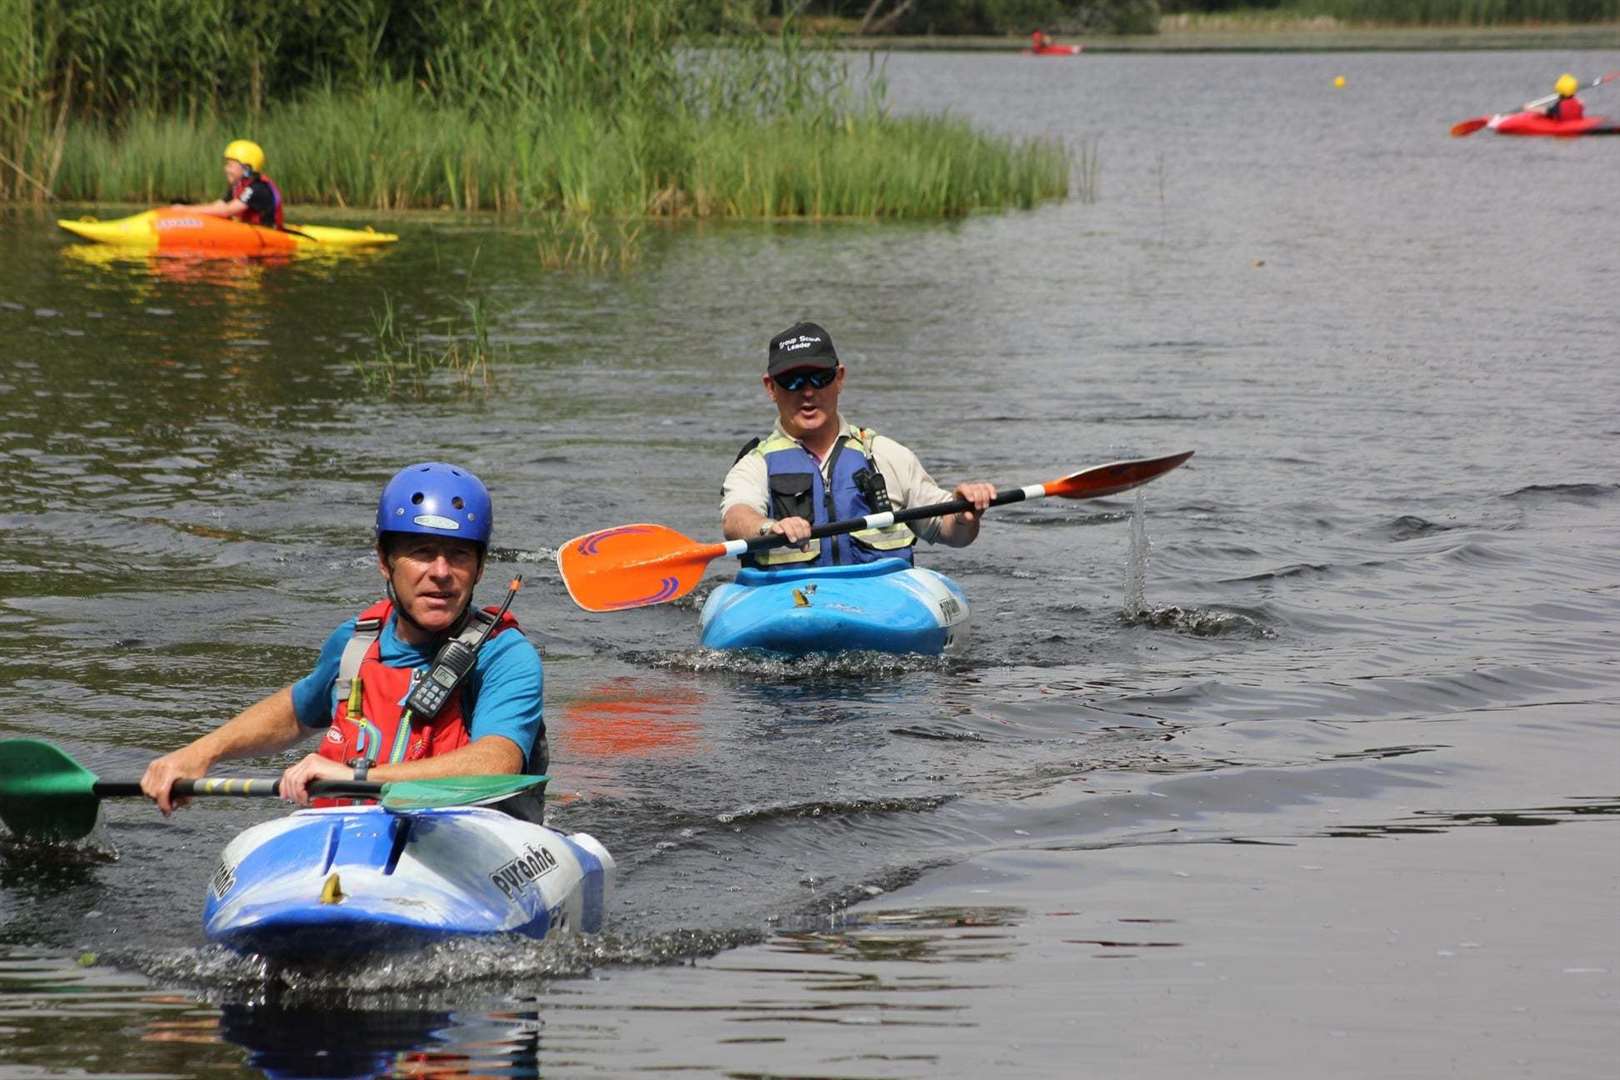 Adult paddlers included Scout leader John Innes (right).